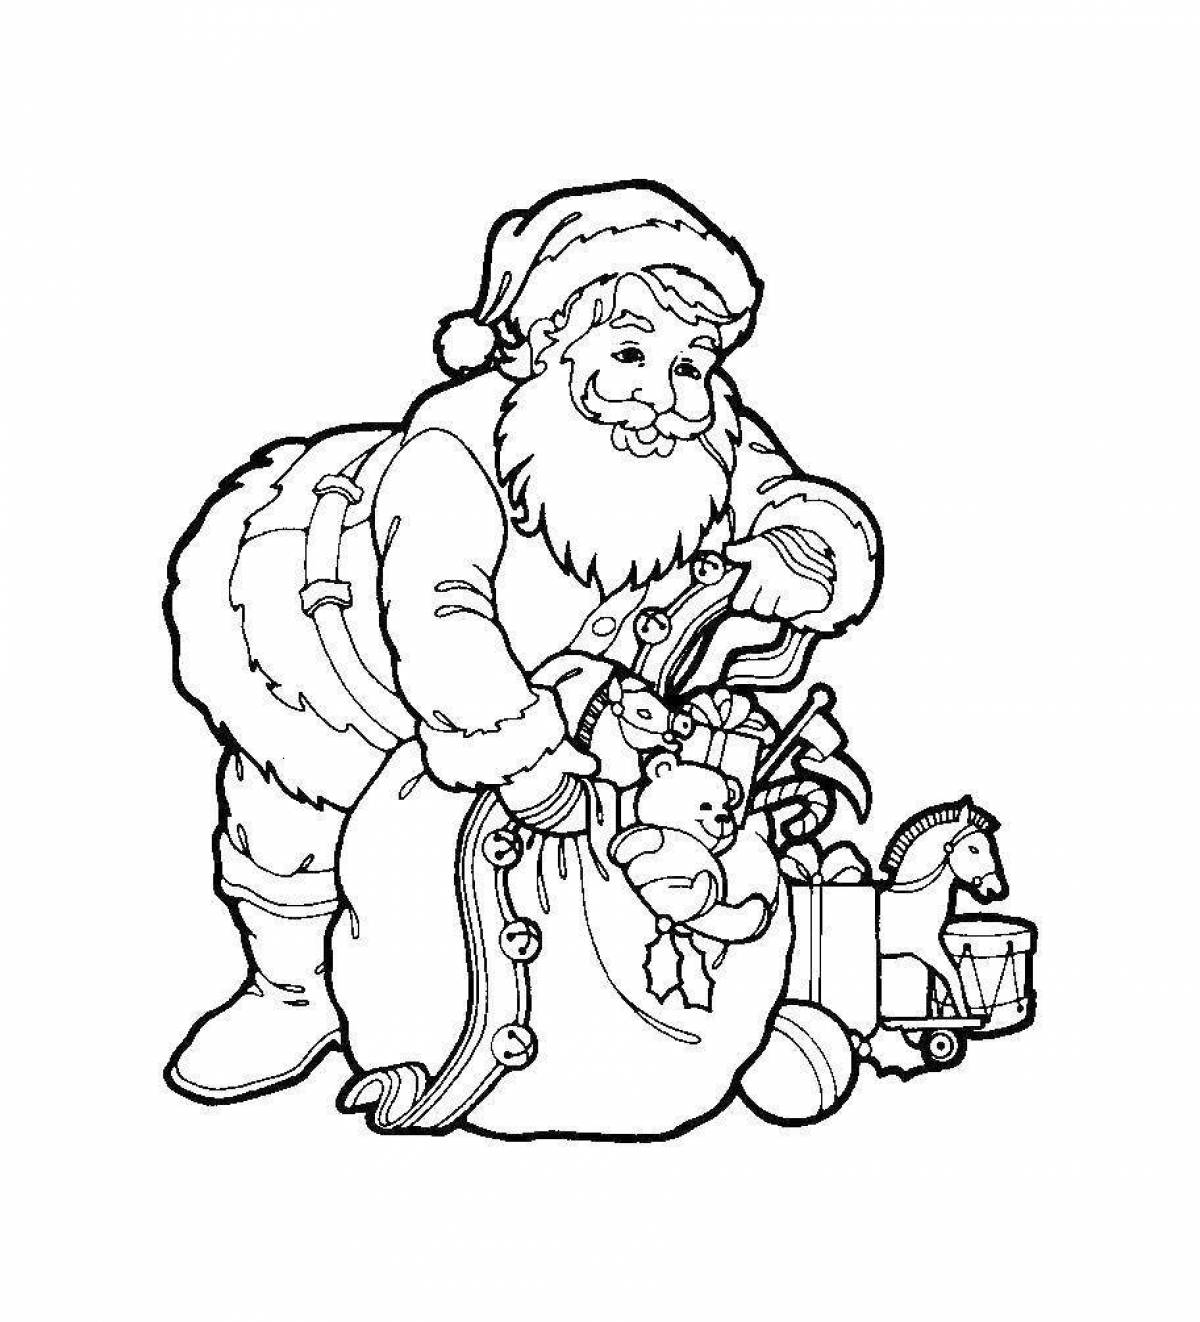 Amazing Santa Claus coloring book for kids